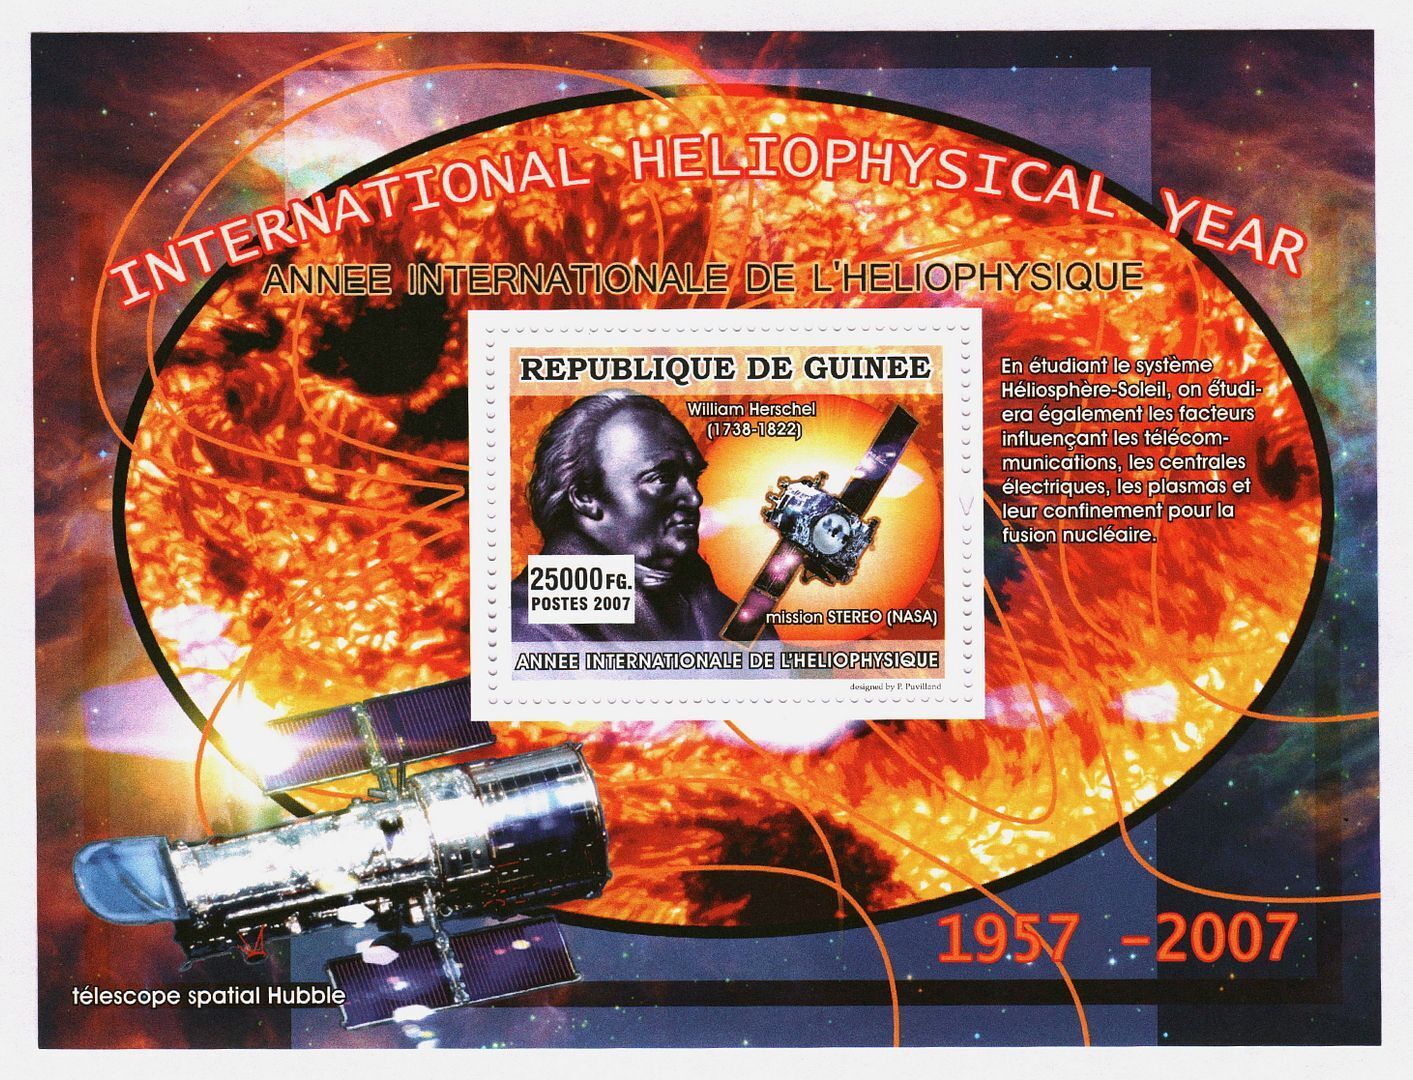 Guinea 2007 Stamps Sheet International Heliophysical Year Mnh #14316